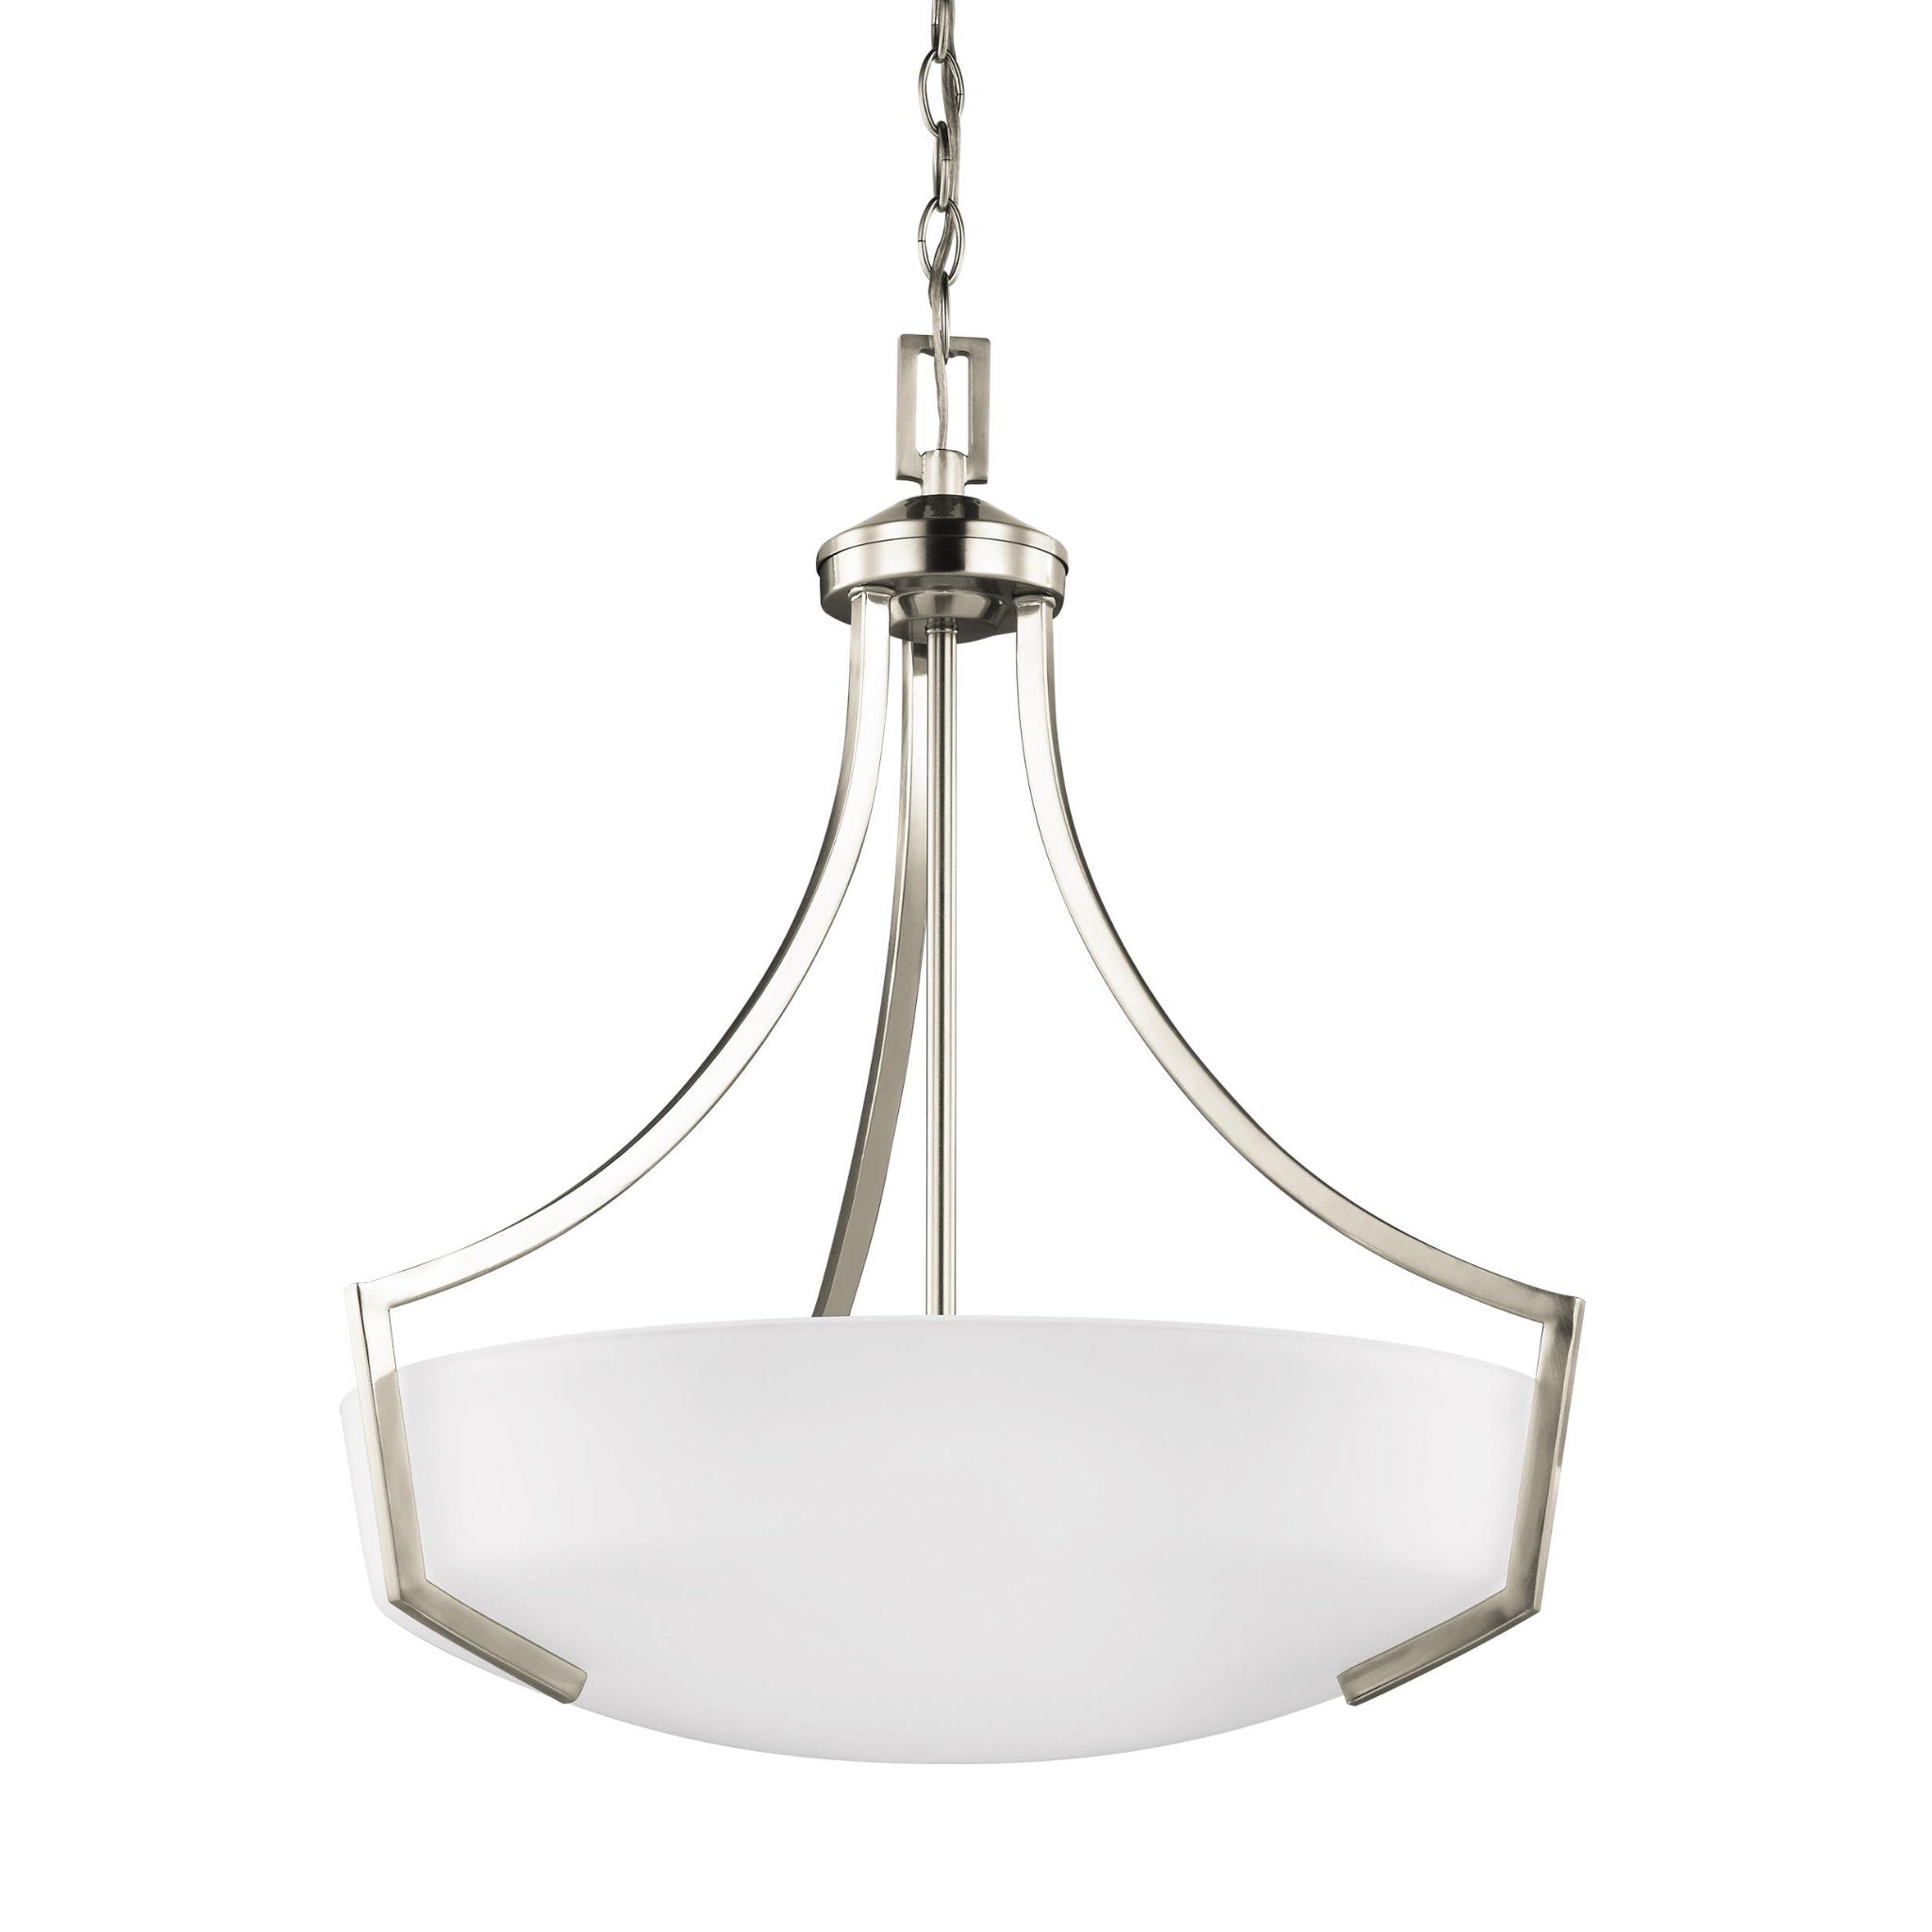 Hanford Three Light Pendant LED Transitional 22.625" Height Steel Round Satin Etched Shade in Brushed Nickel